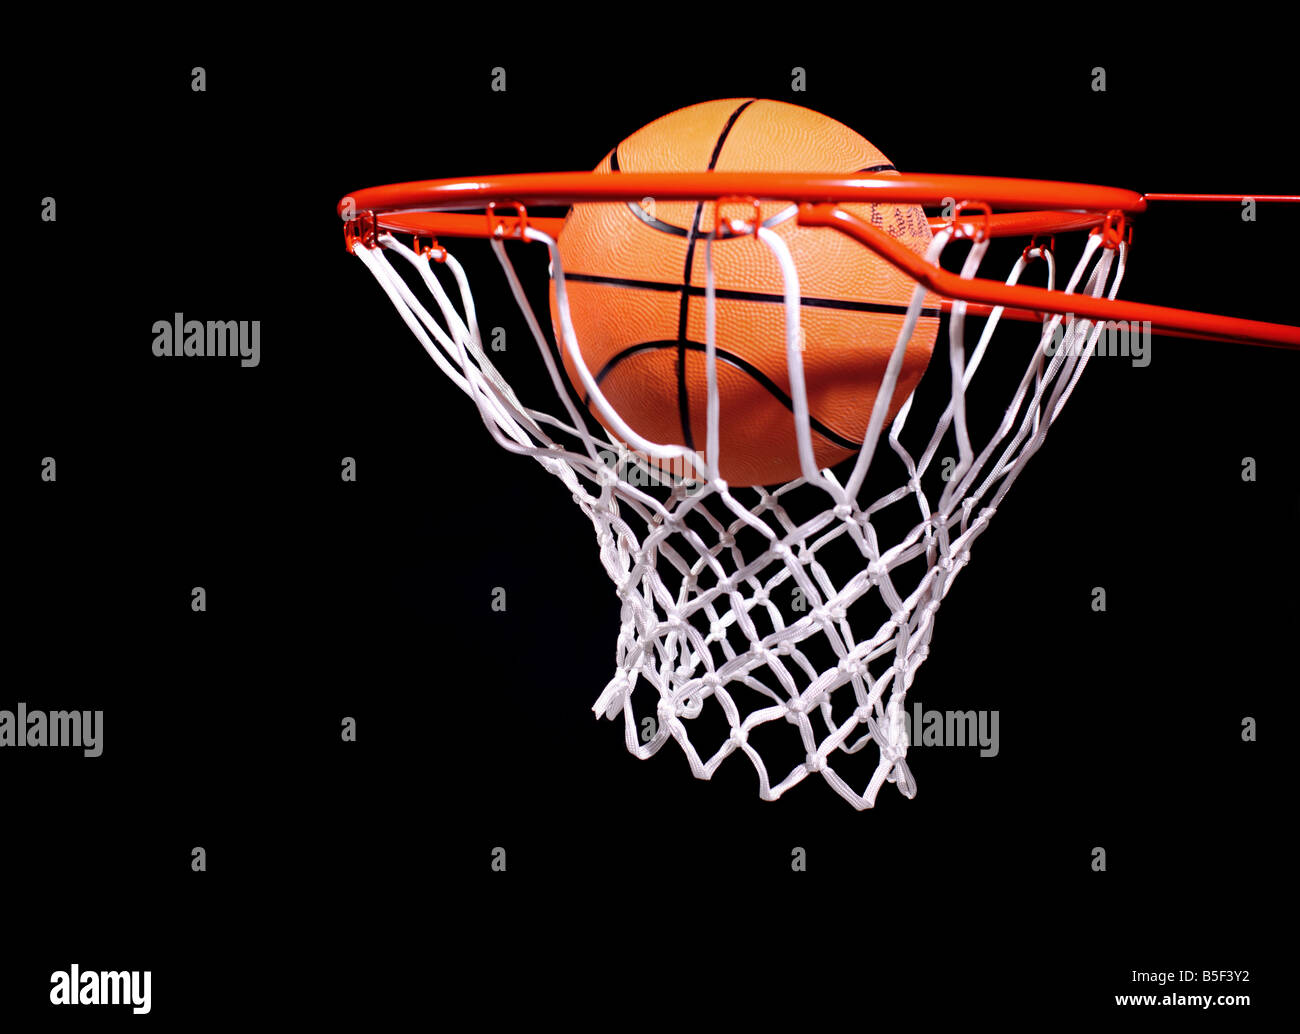 Basketball in hoop on black background Stock Photo